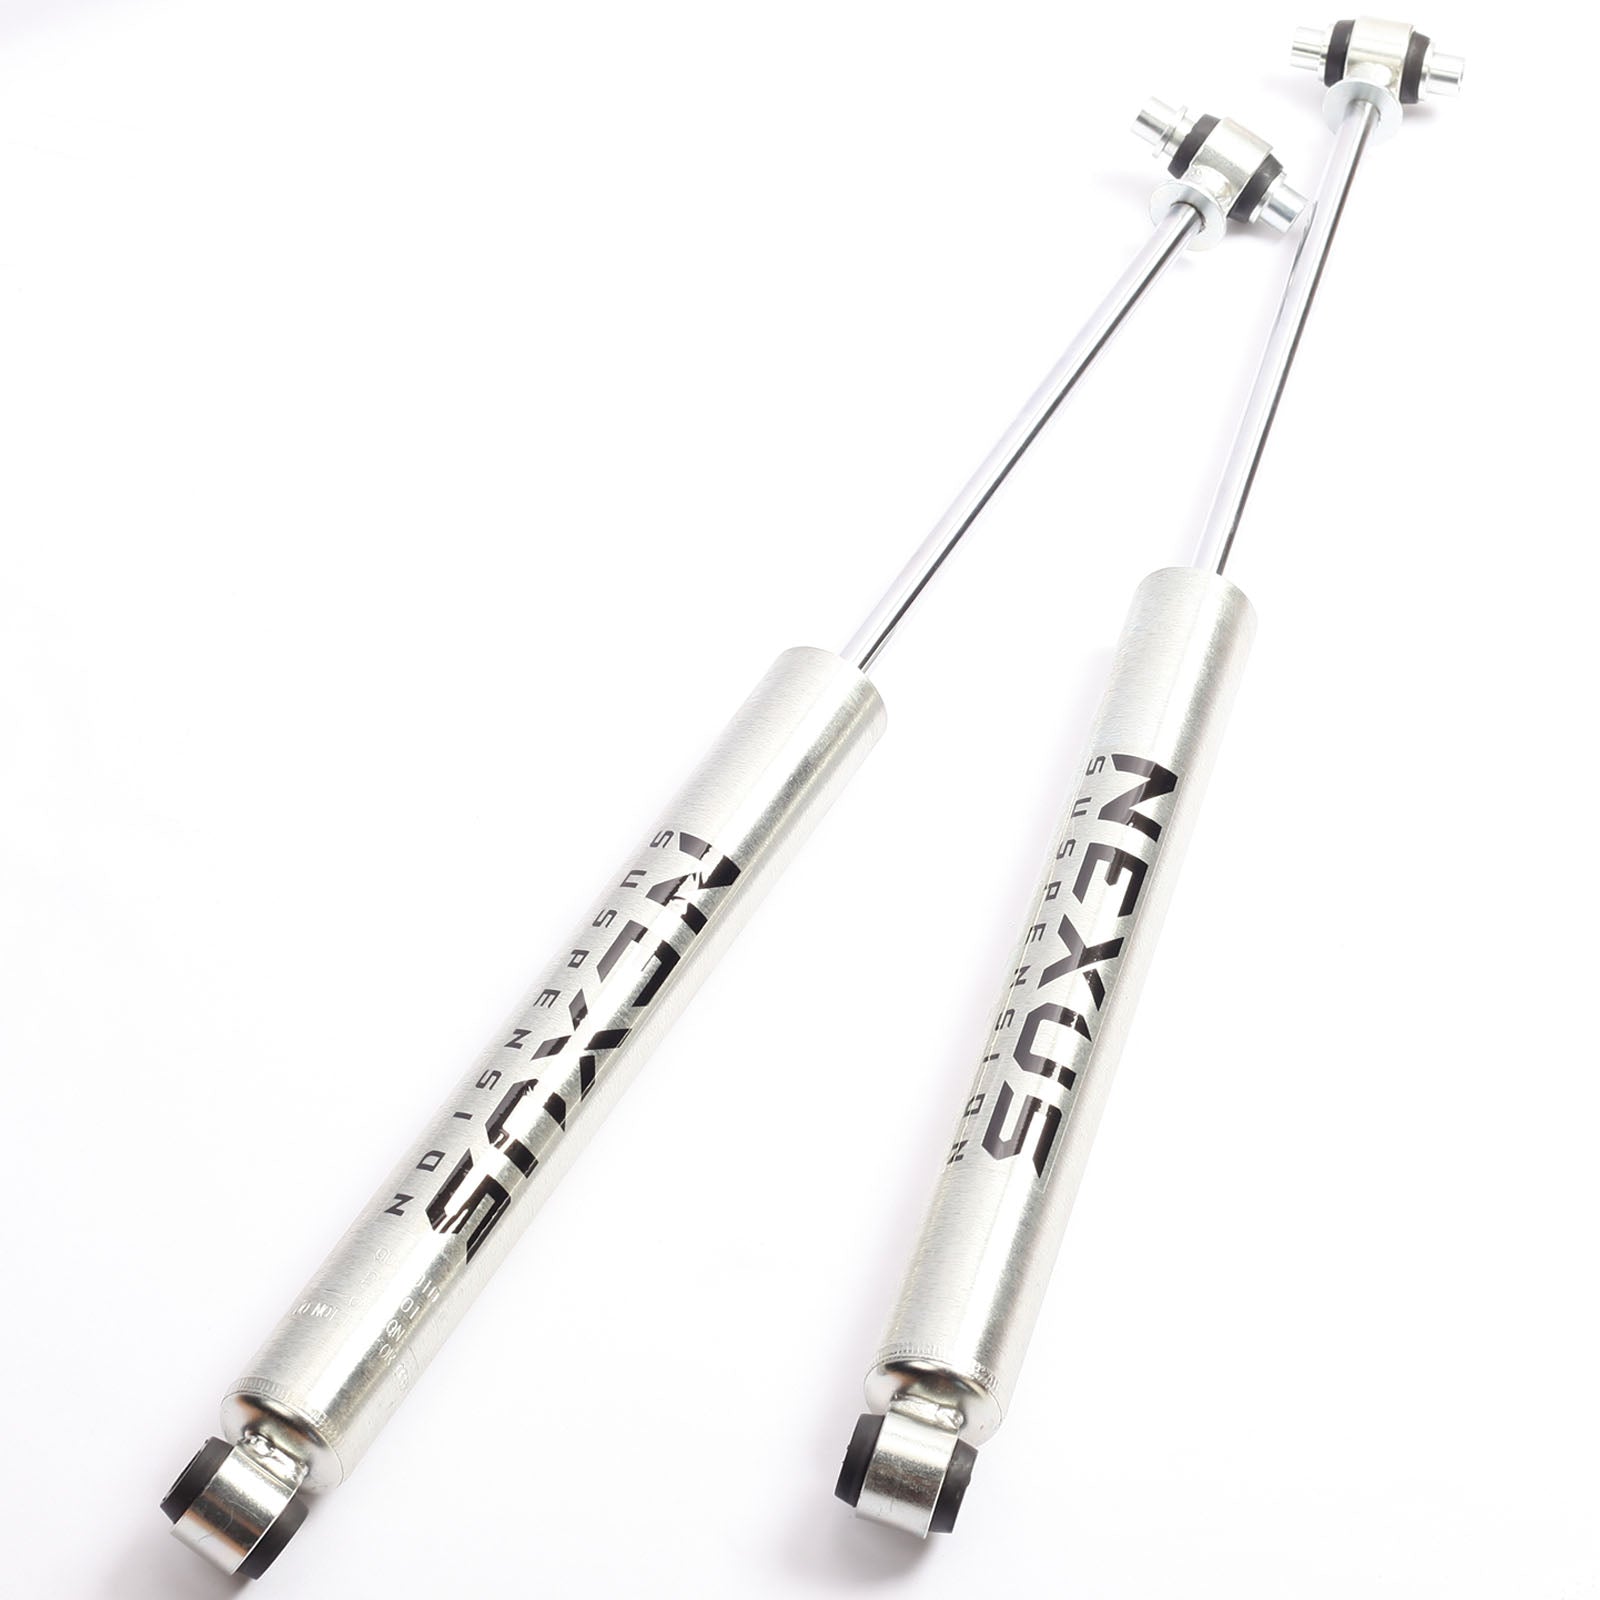 NEXUS SUSPENSION 3-4 Inch Lift Rear Shock Absorber for 2019-2022 GMC Sierra 1500 2wd/4wd Chevy Silverado 1500 2wd/4wd,Zinc Plated Coating,Pair Pack